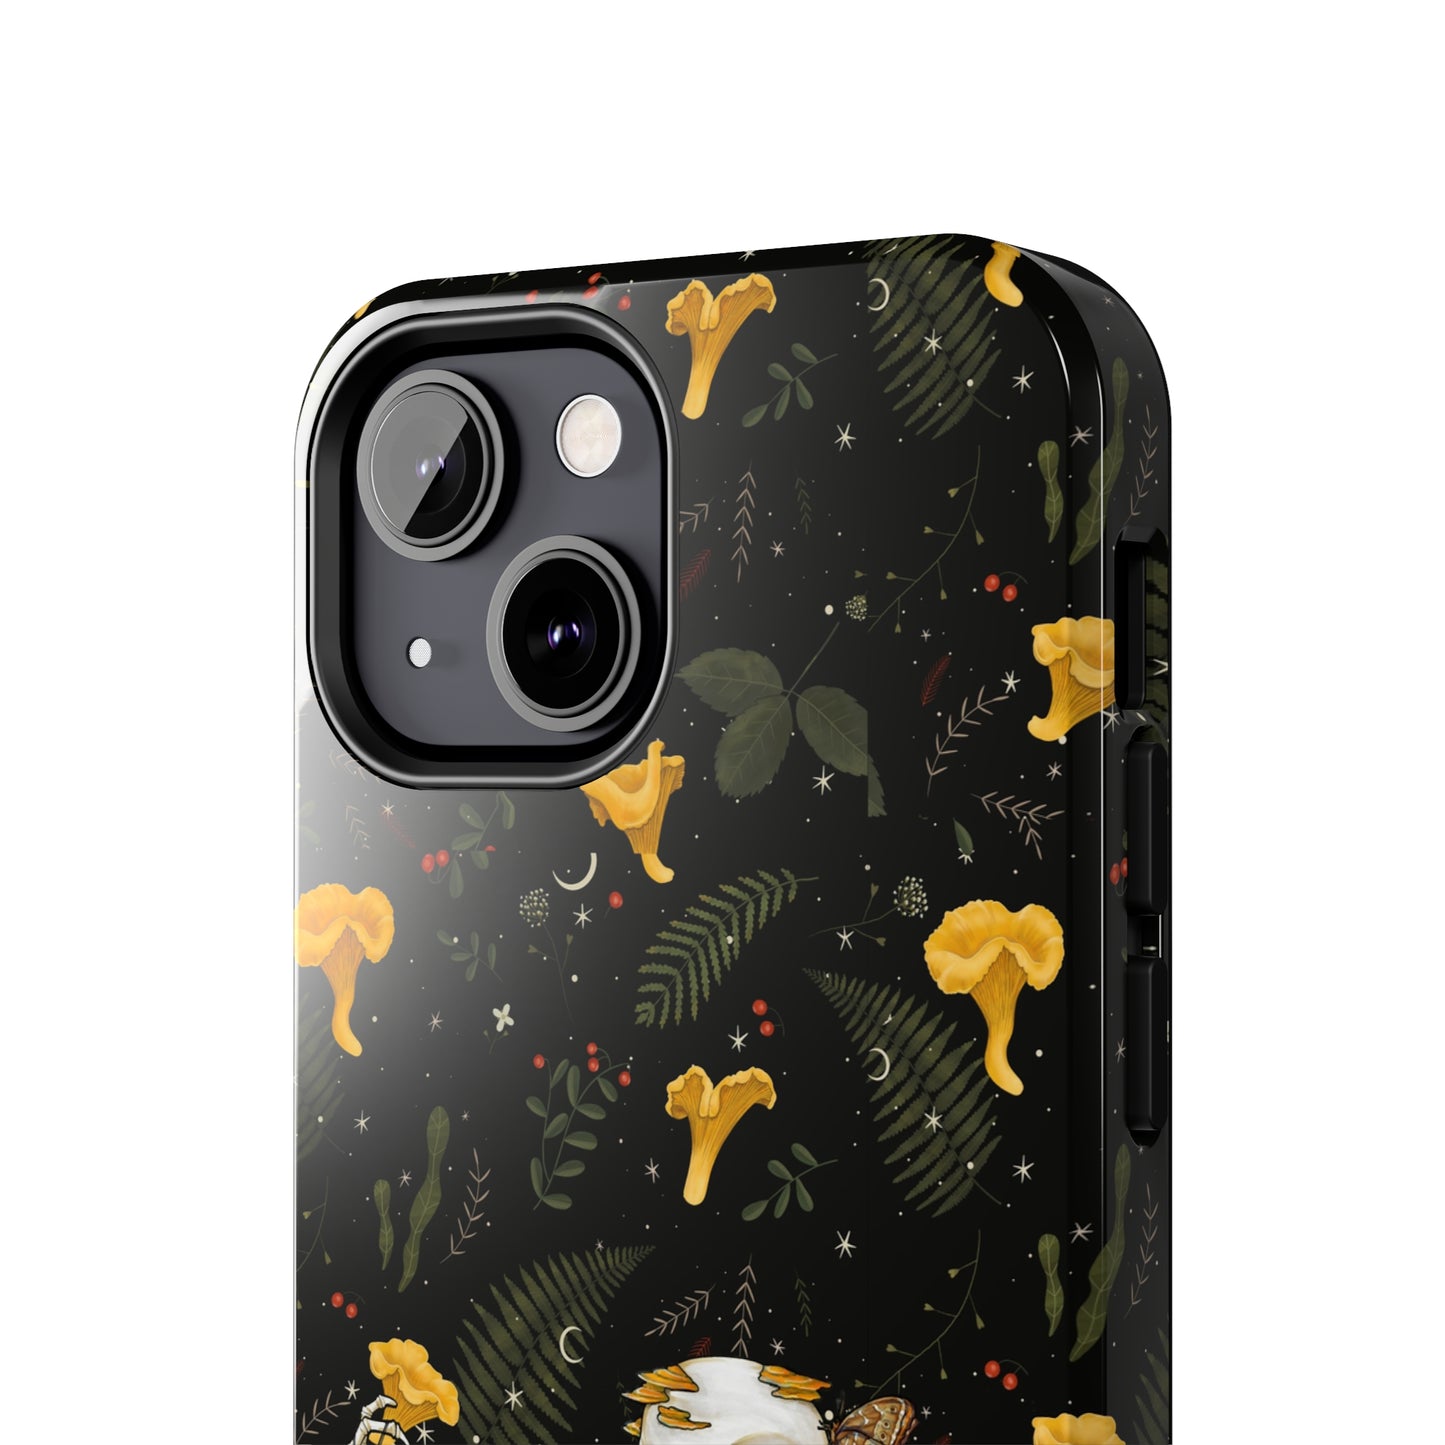 Mushrooms, skeleton and plants Tough Phone be Cases, Case-Matefor iPhone 15, iPhone 14, iPhone 13, iPhone 12 and iPhone 11